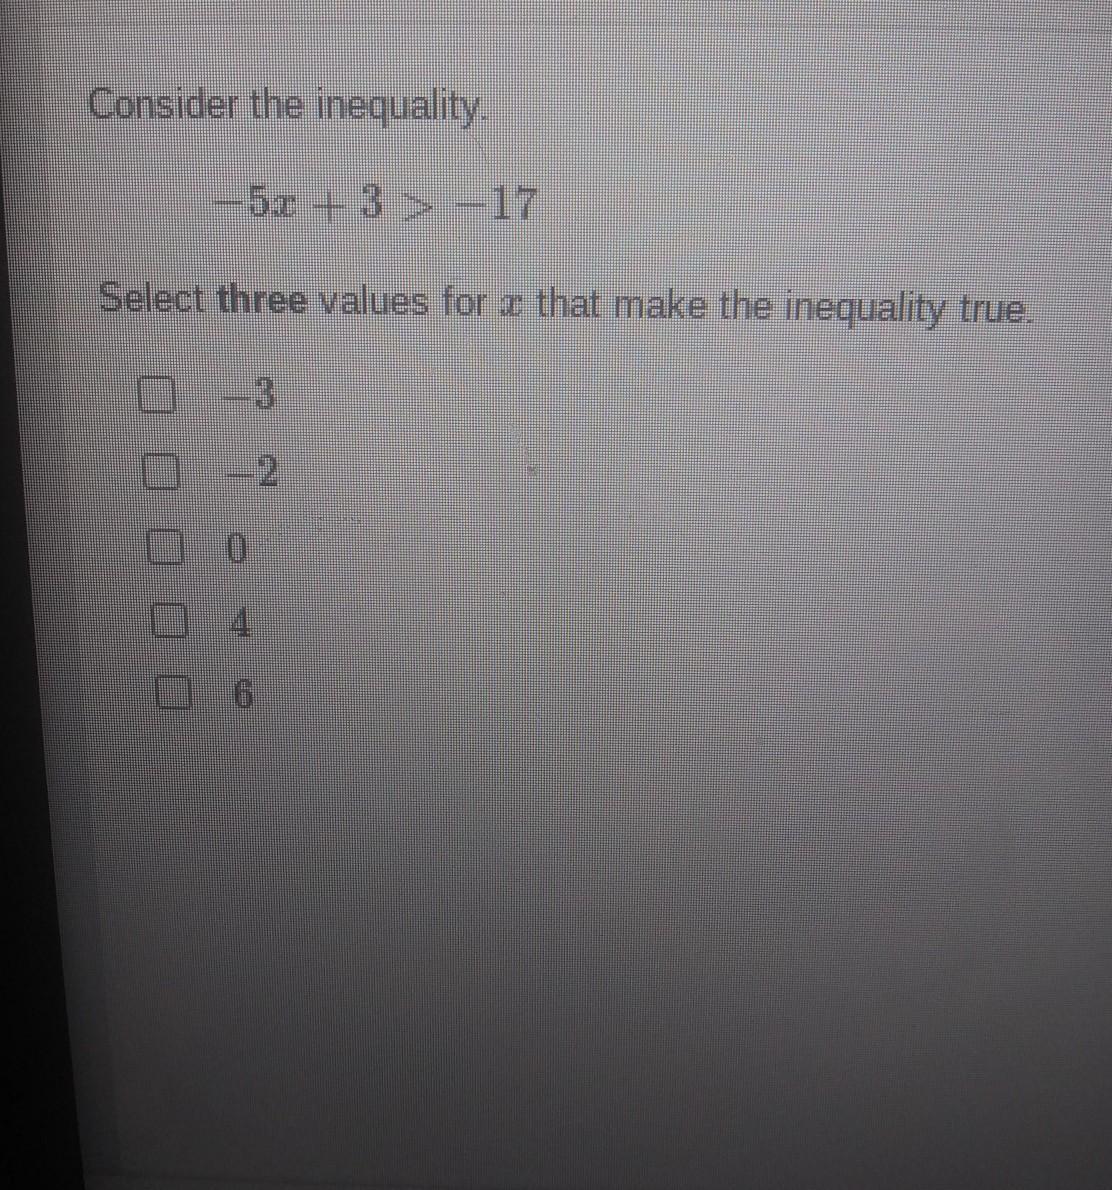 Select Three Values For X That Makes The Inequality True